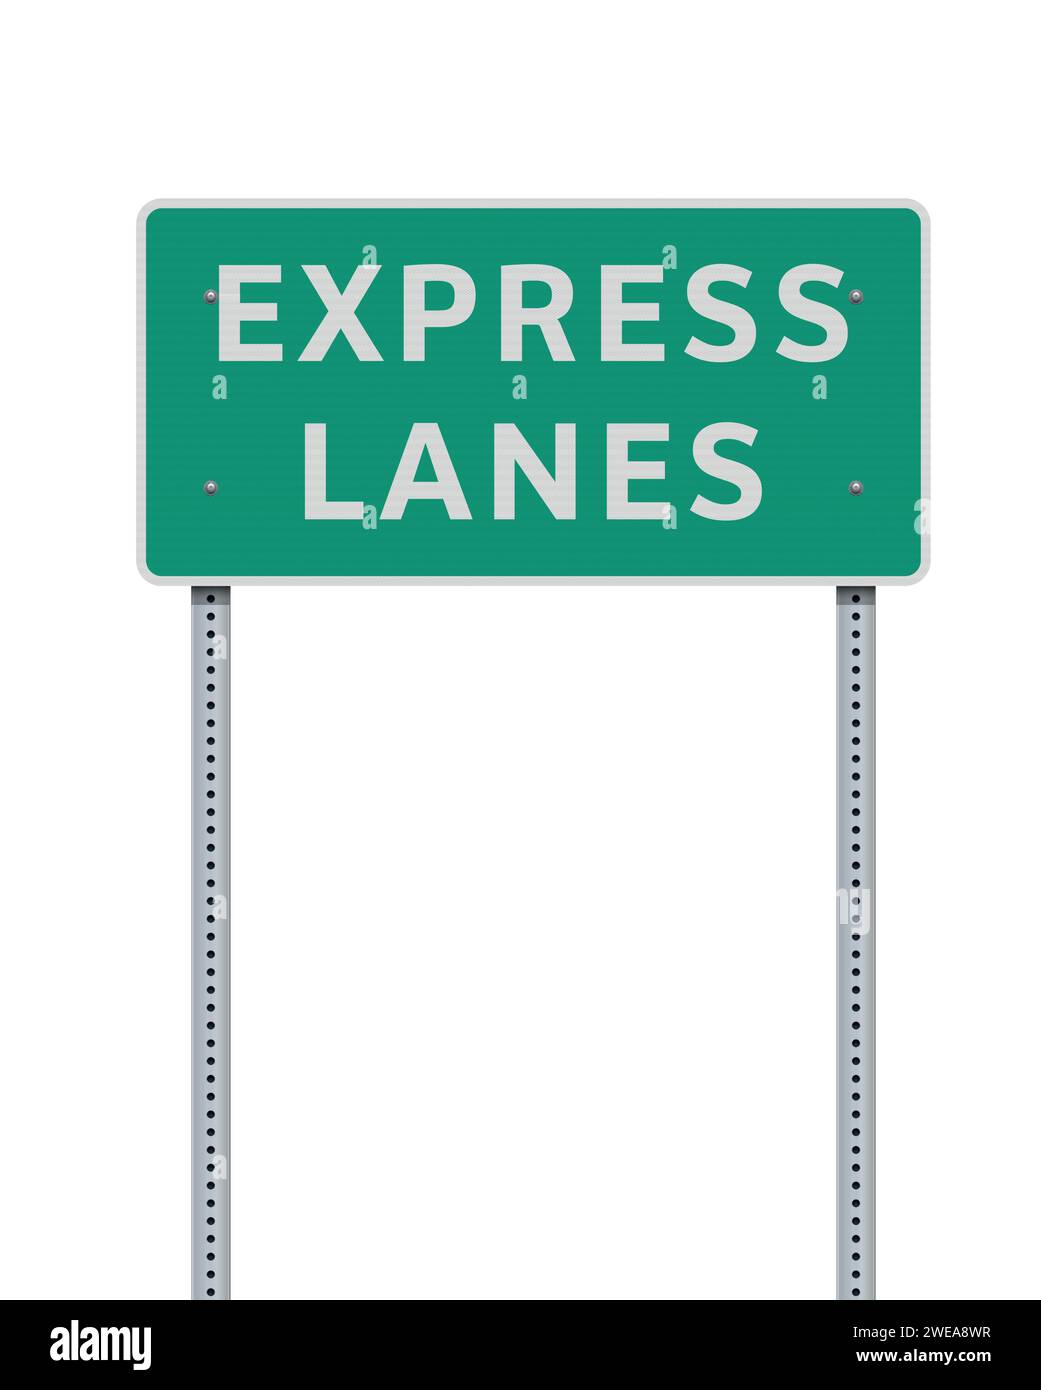 Vector illustration of the Express Lanes green road sign on metallic posts Stock Vector